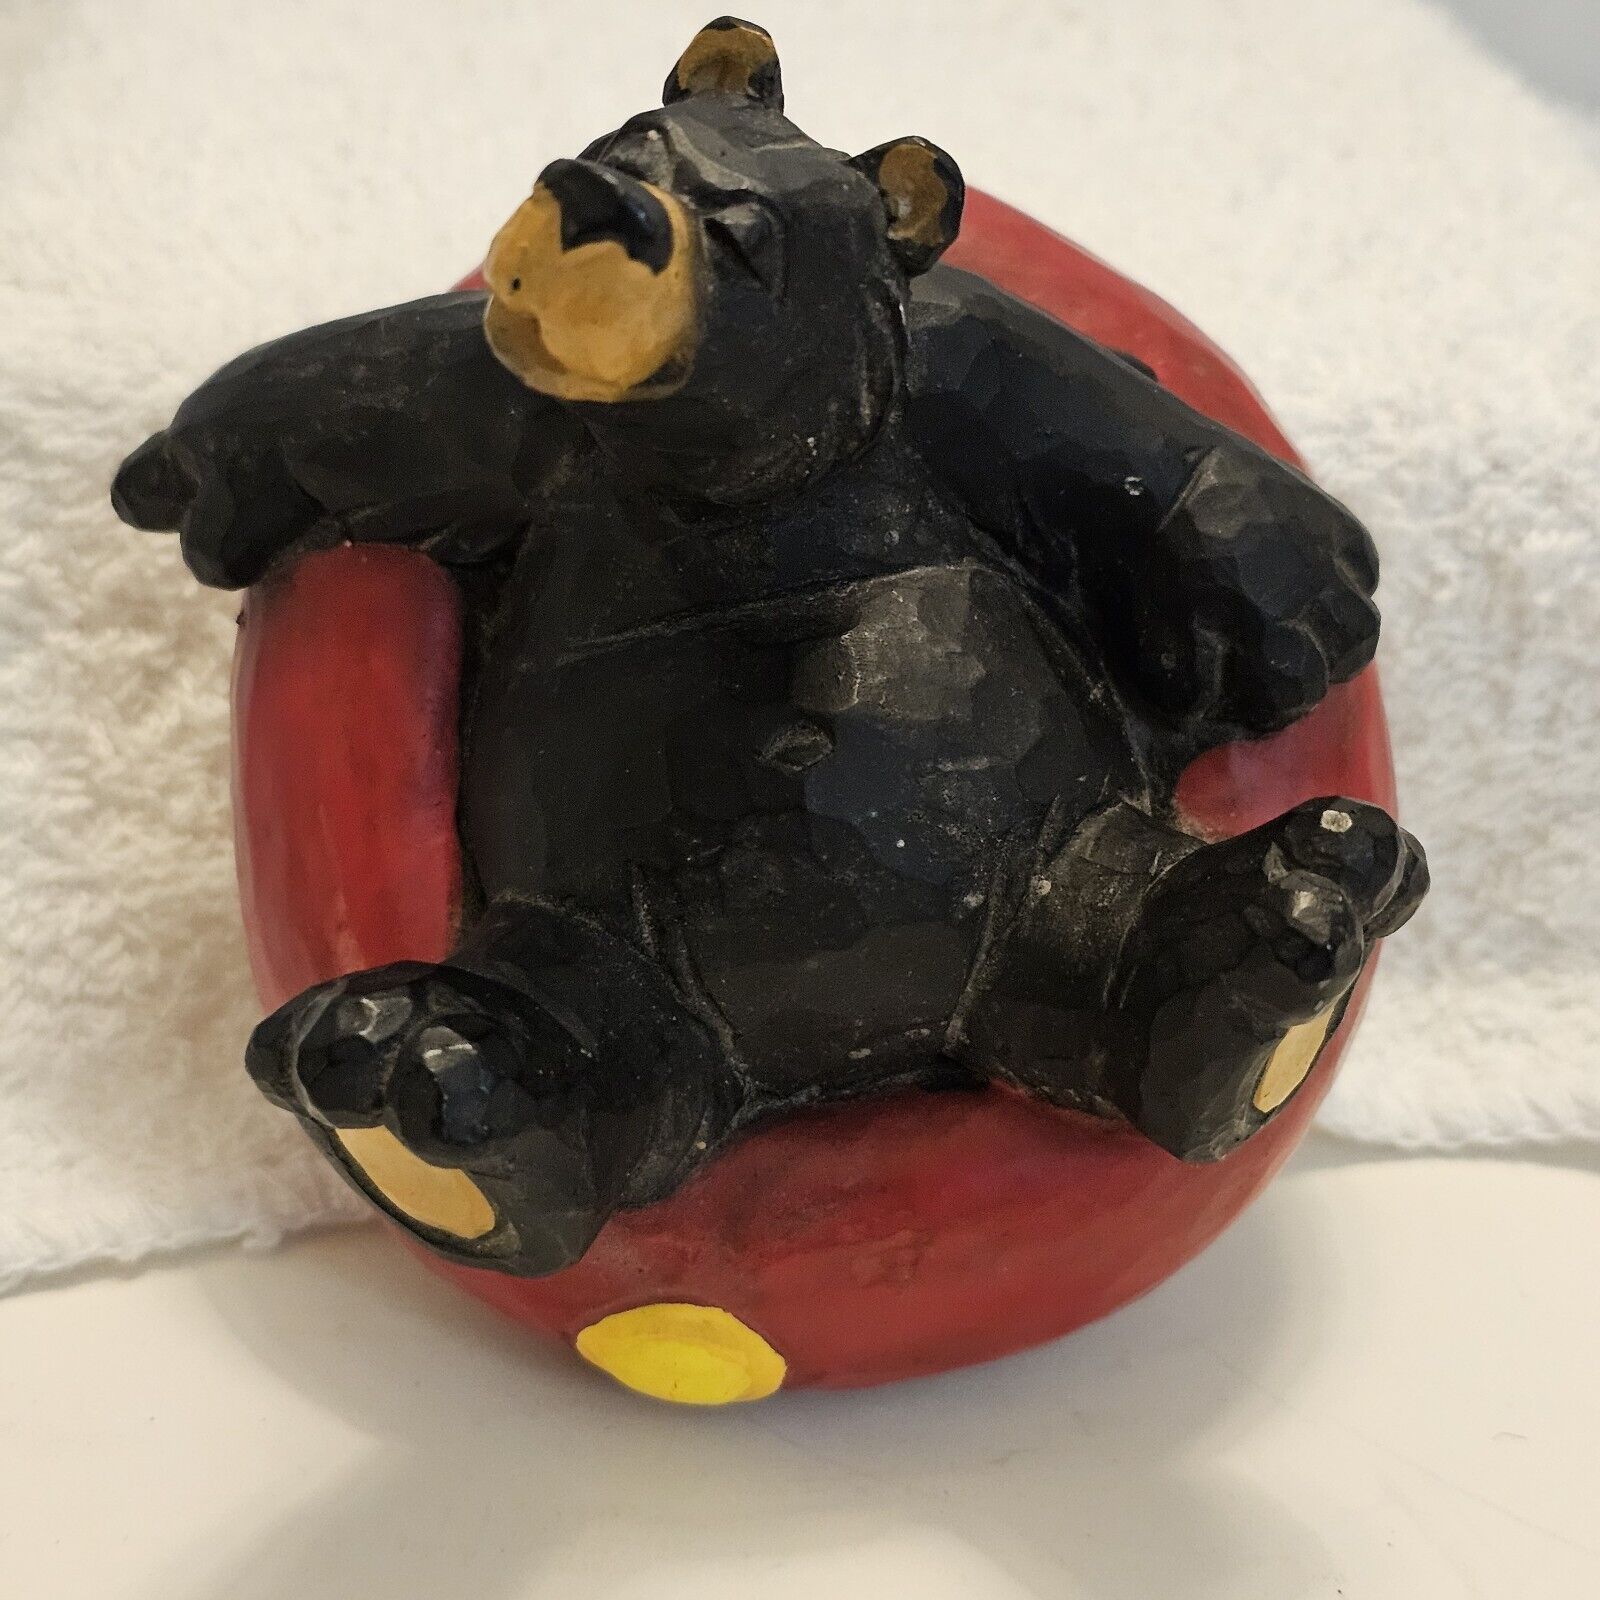 Wetherbee Collection Black Bear Floating On An Inner Tube Taking Life Easy Sweet